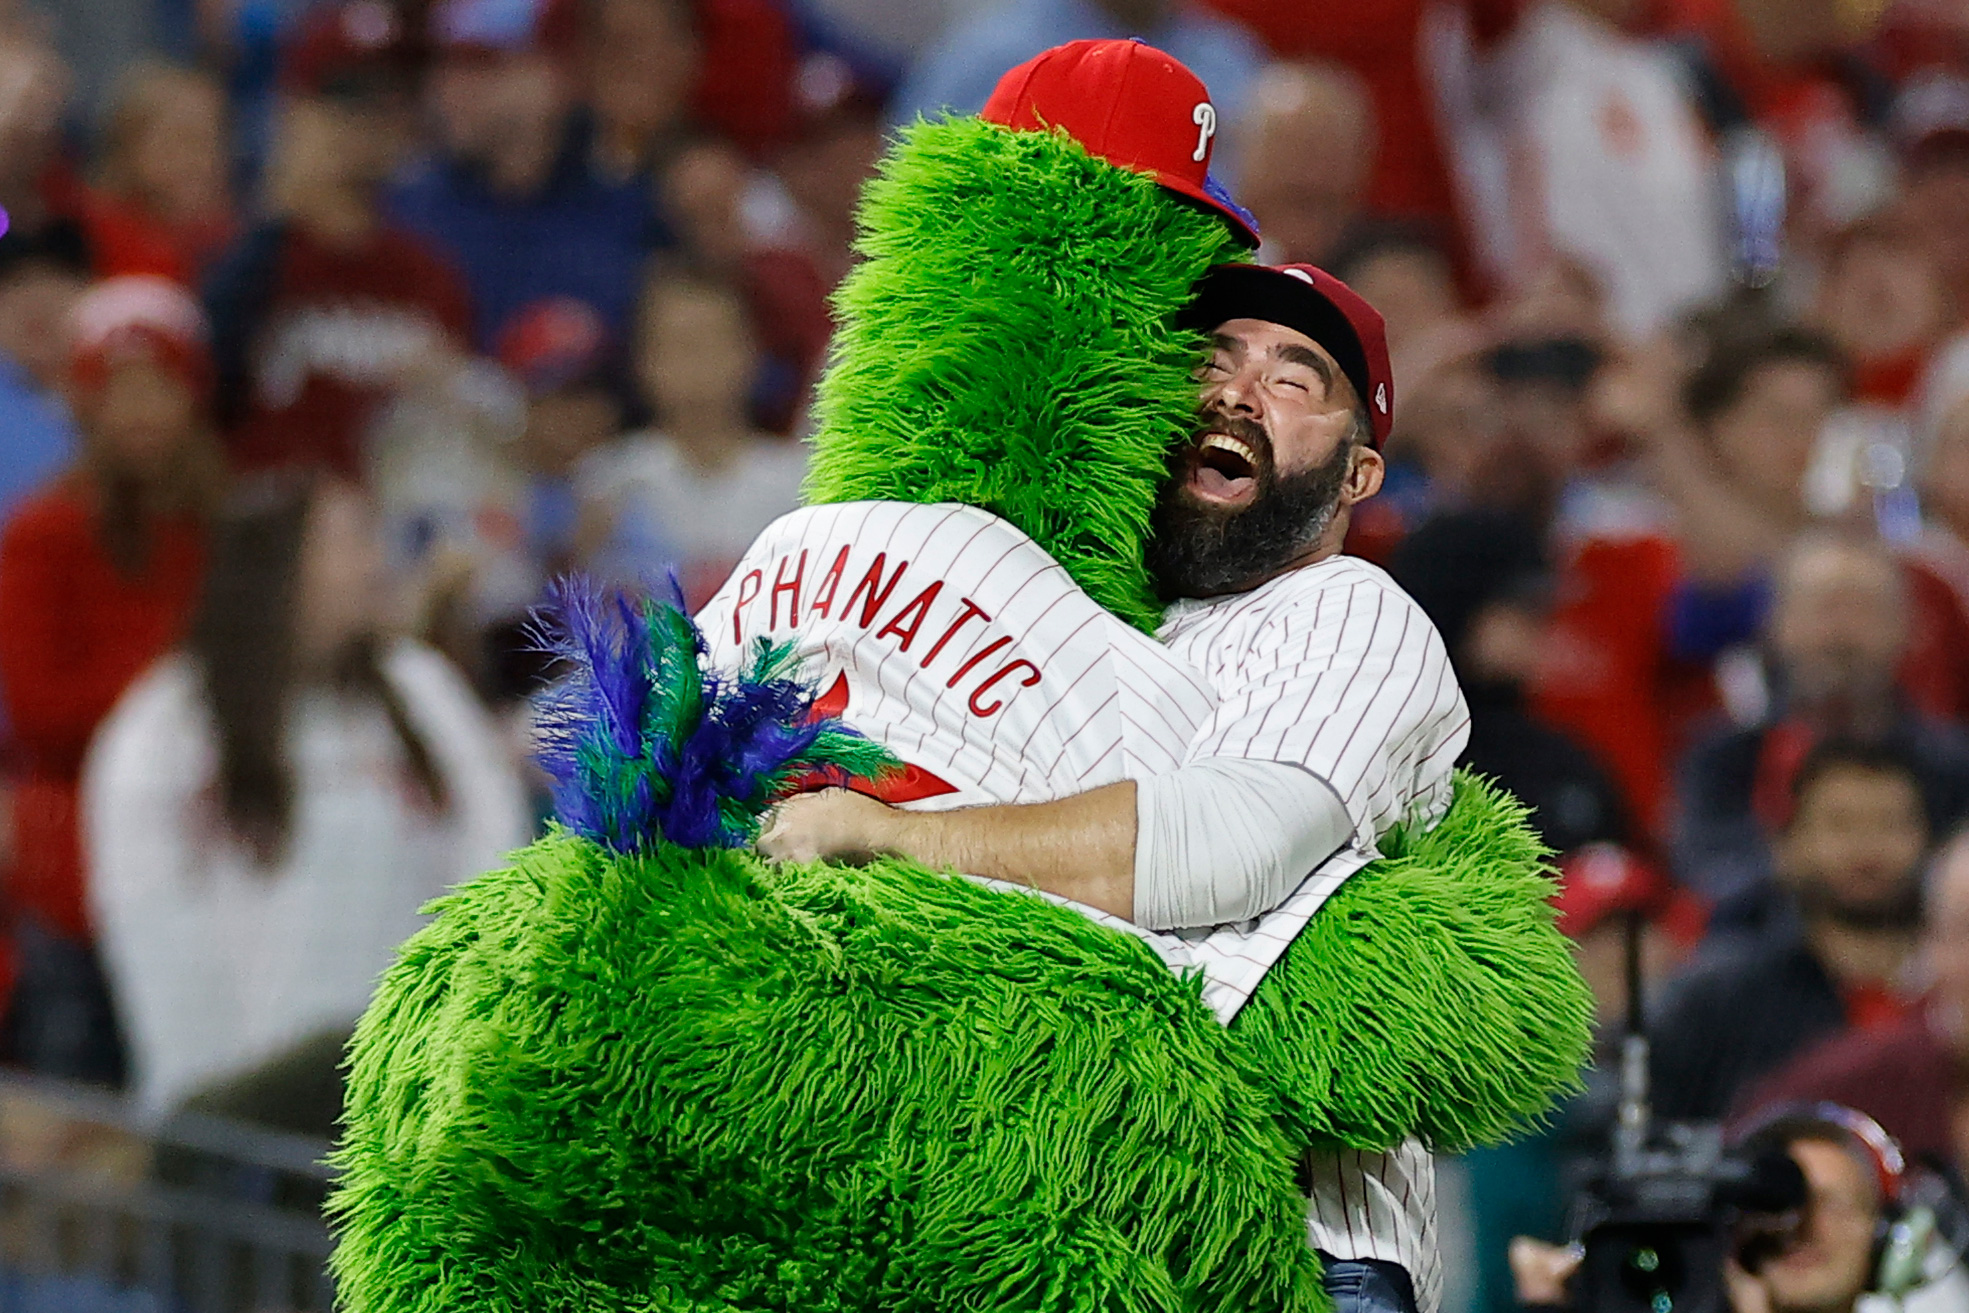 Philly Phanatic has always been city's greatest mascot. Sorry, Gritty.